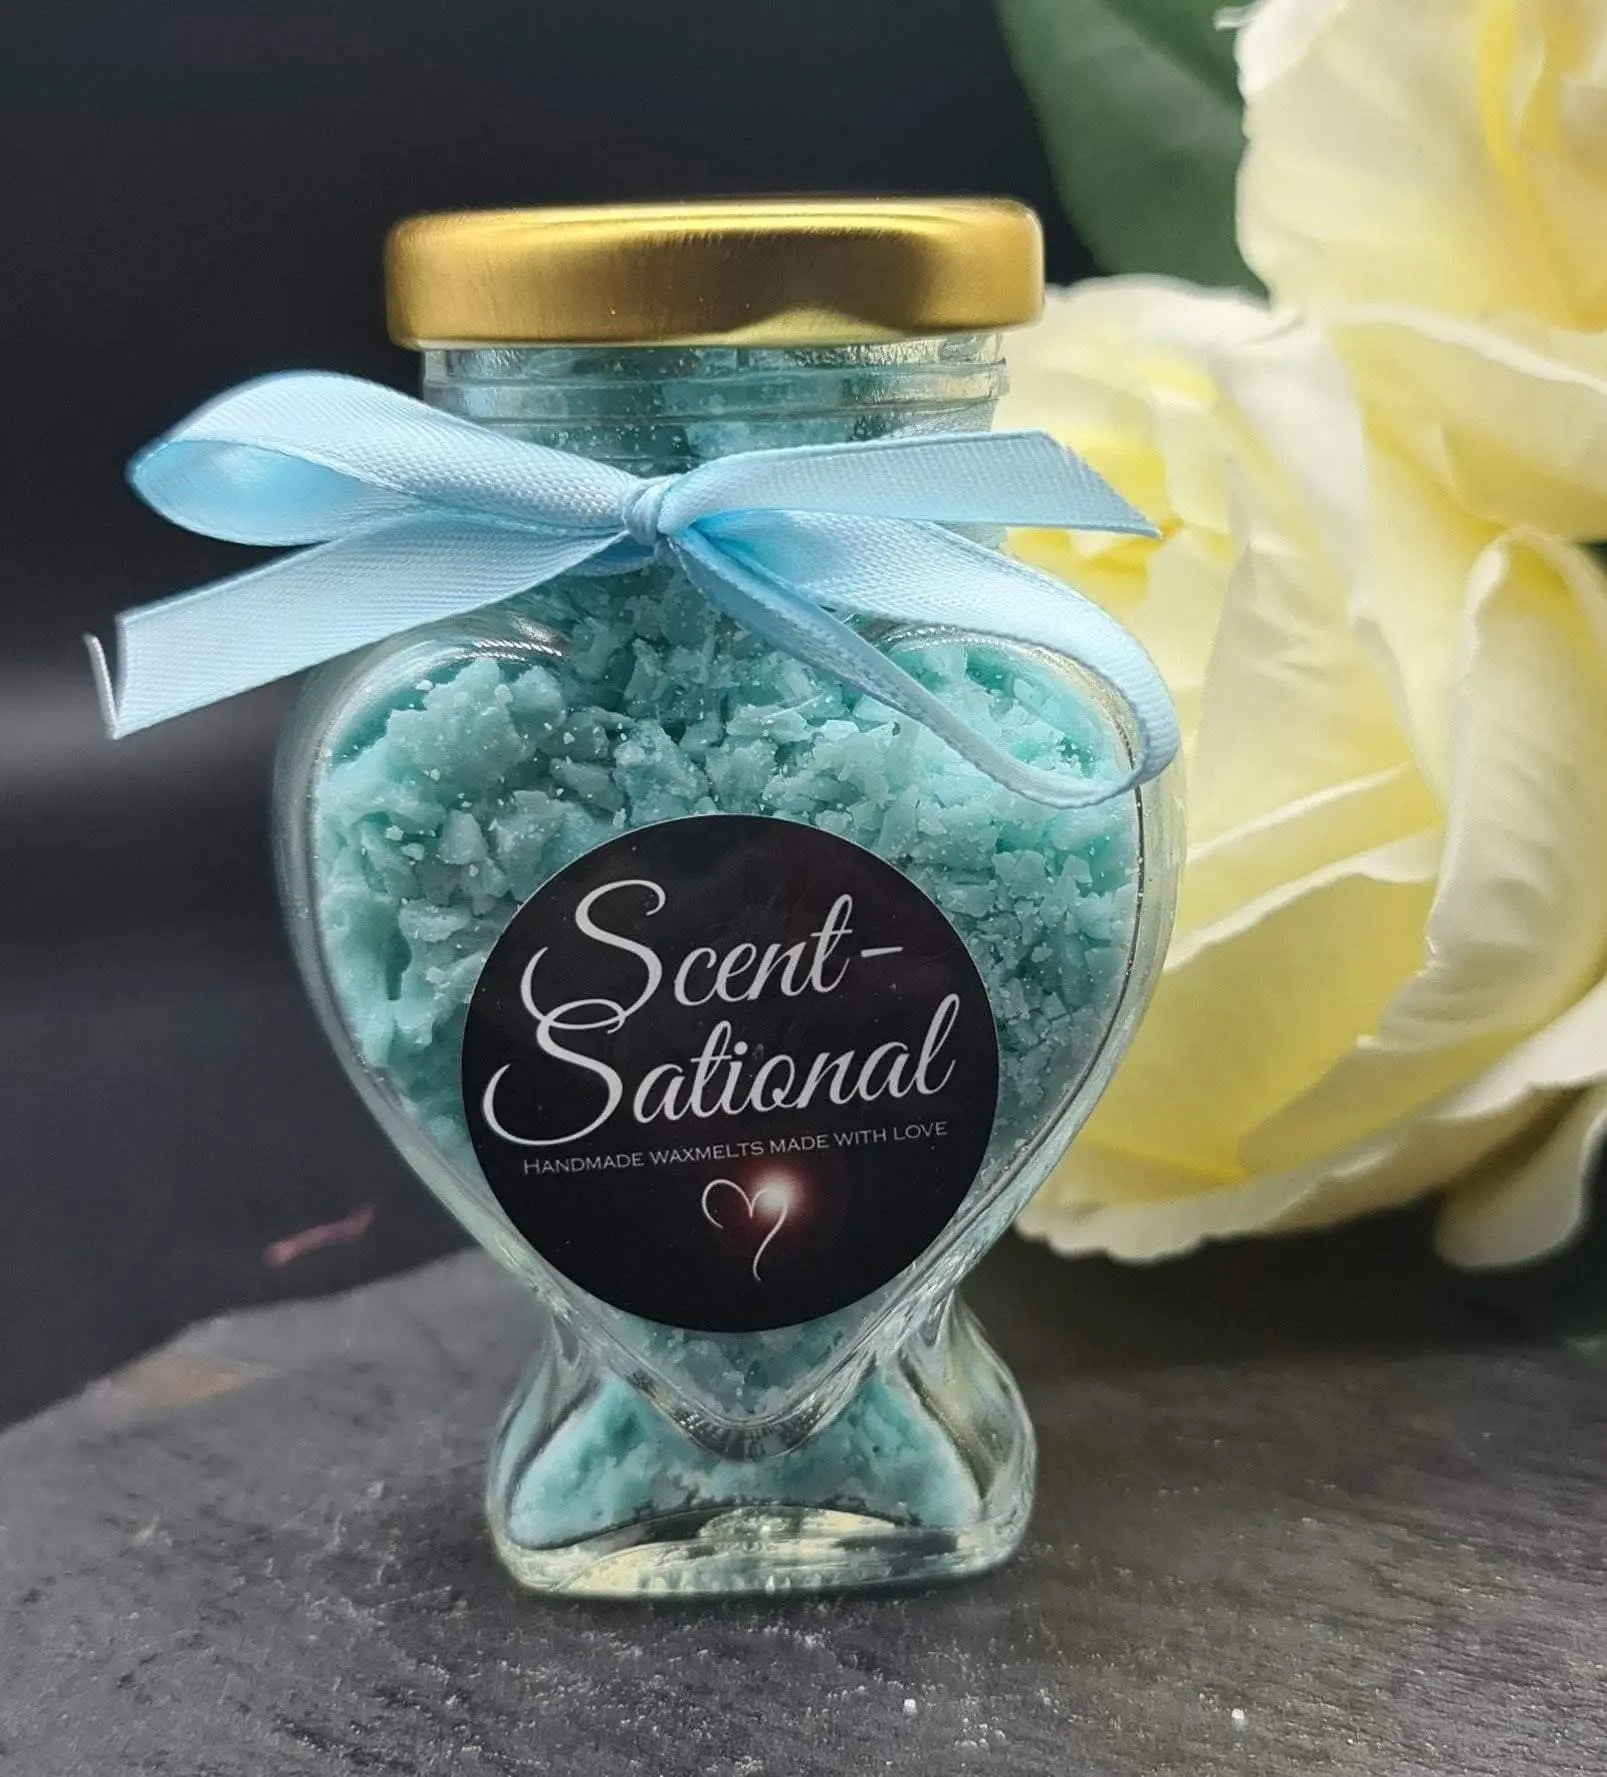 A Thousand Wishes Wax Melt Crumble Scent Sational Wax melts